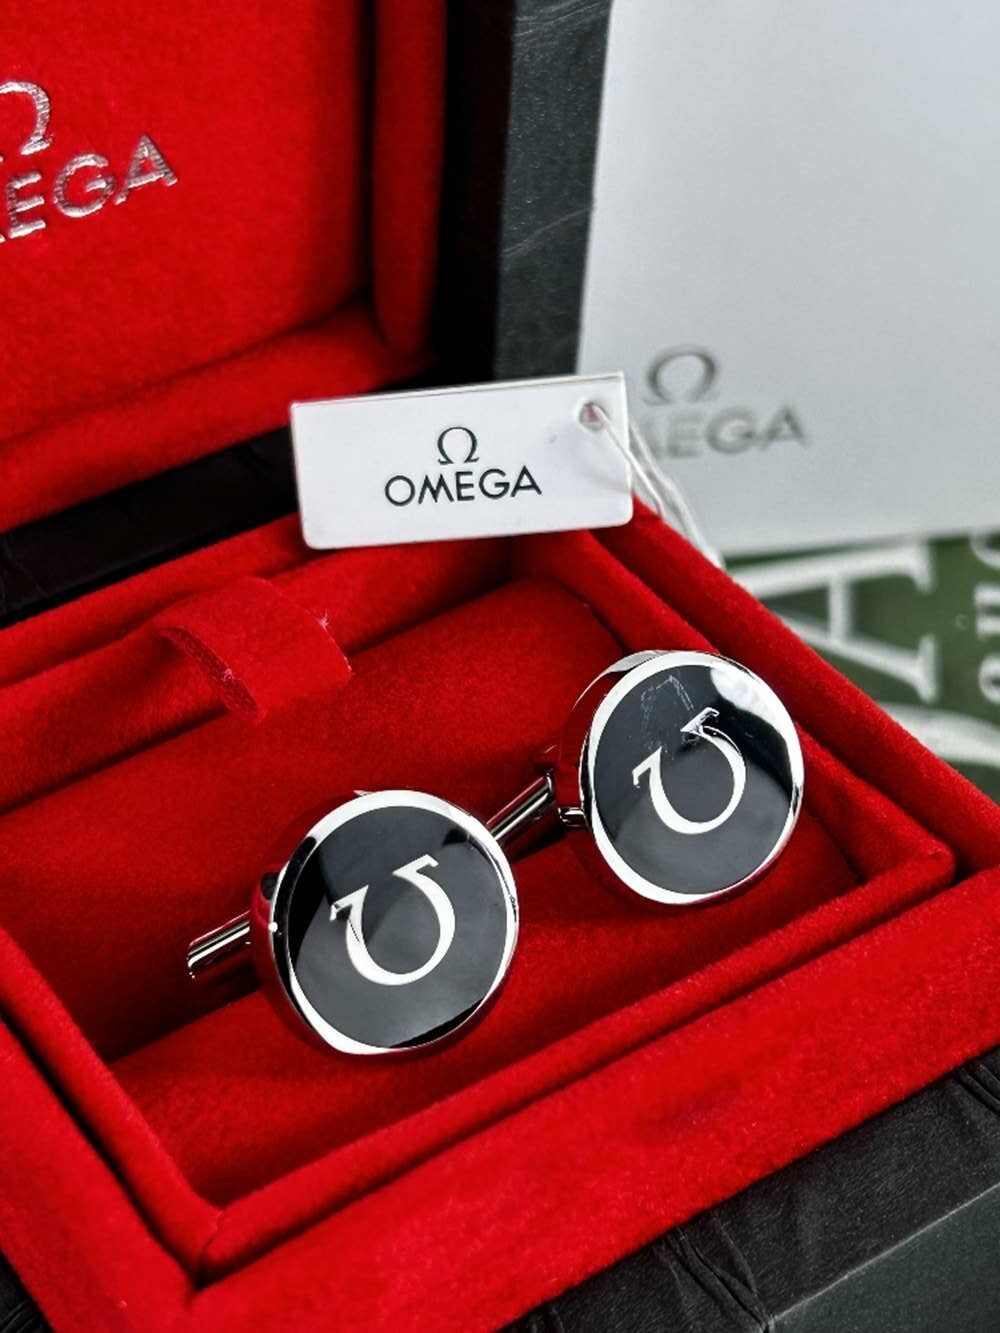 Omega Official Merchandise Gent`s Cufflinks - Image 7 of 8